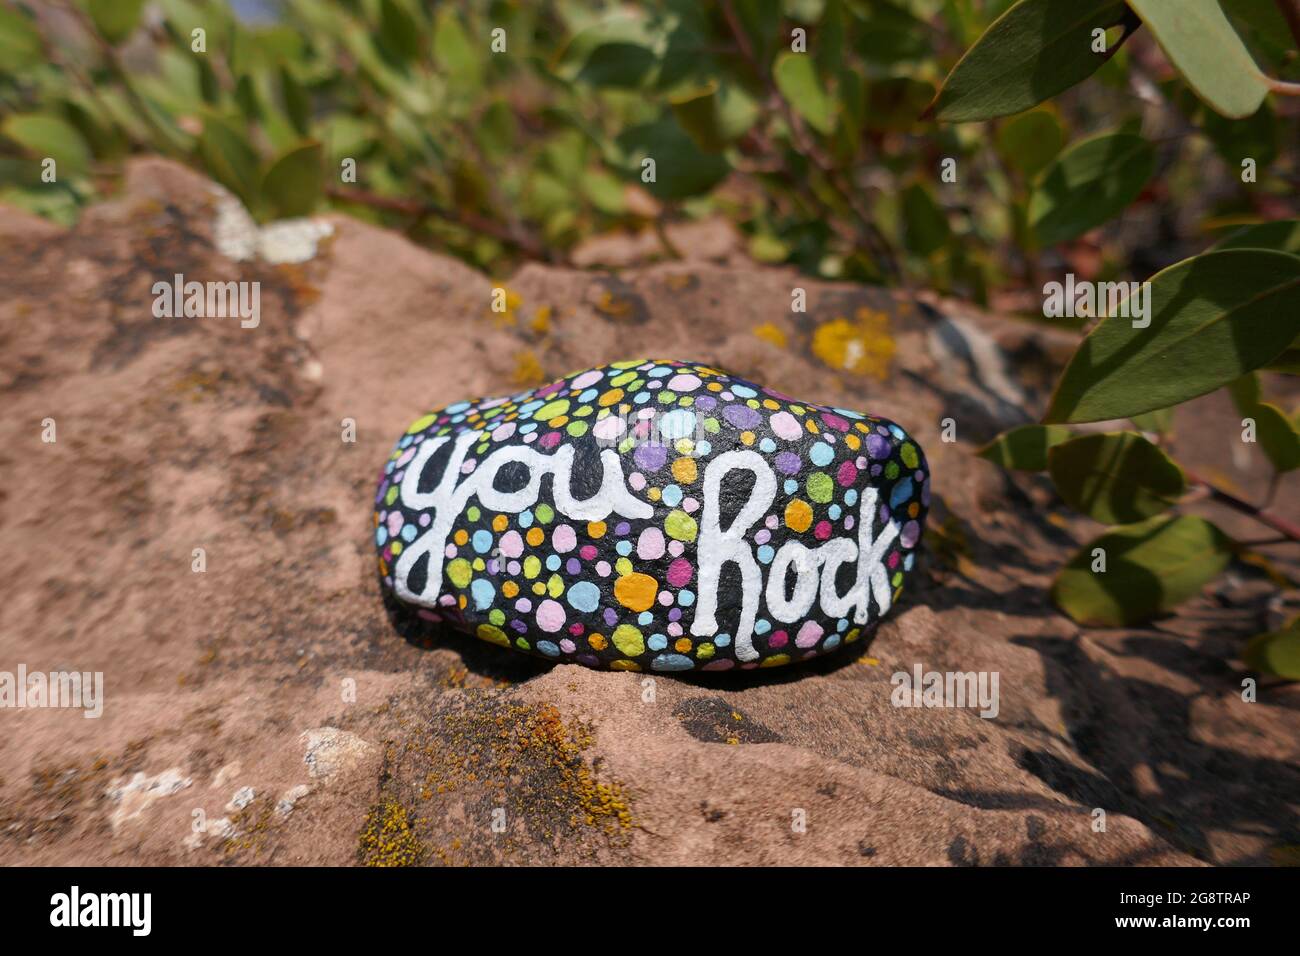 Kindness rock with painted you rock message on large rock Stock Photo